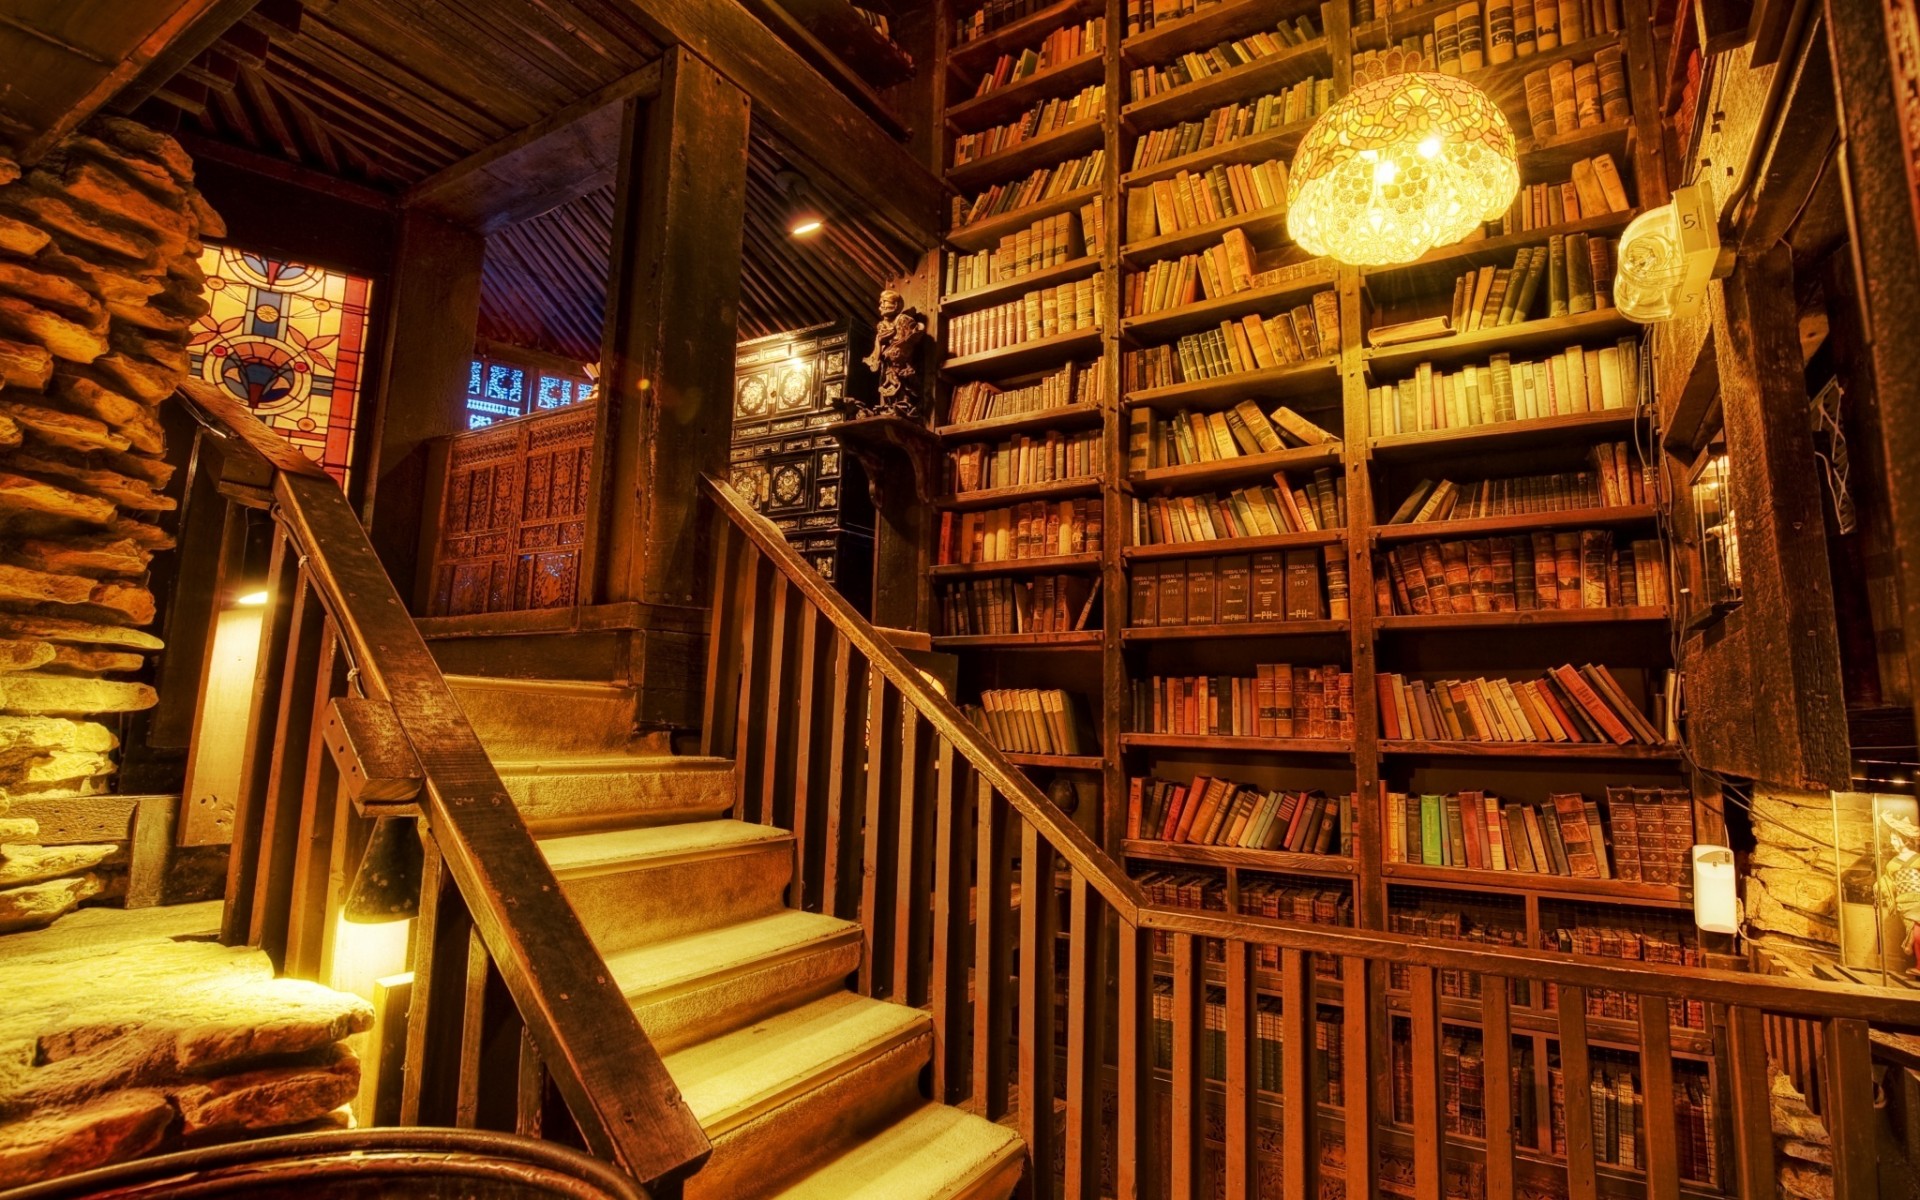 world, Architecture, Room, Library, Wood, Retro, Cabin, Resort, Hdr, Books, Stairs, Rustic, Stone, Buildings, Lamps, Lights, Rail Wallpaper